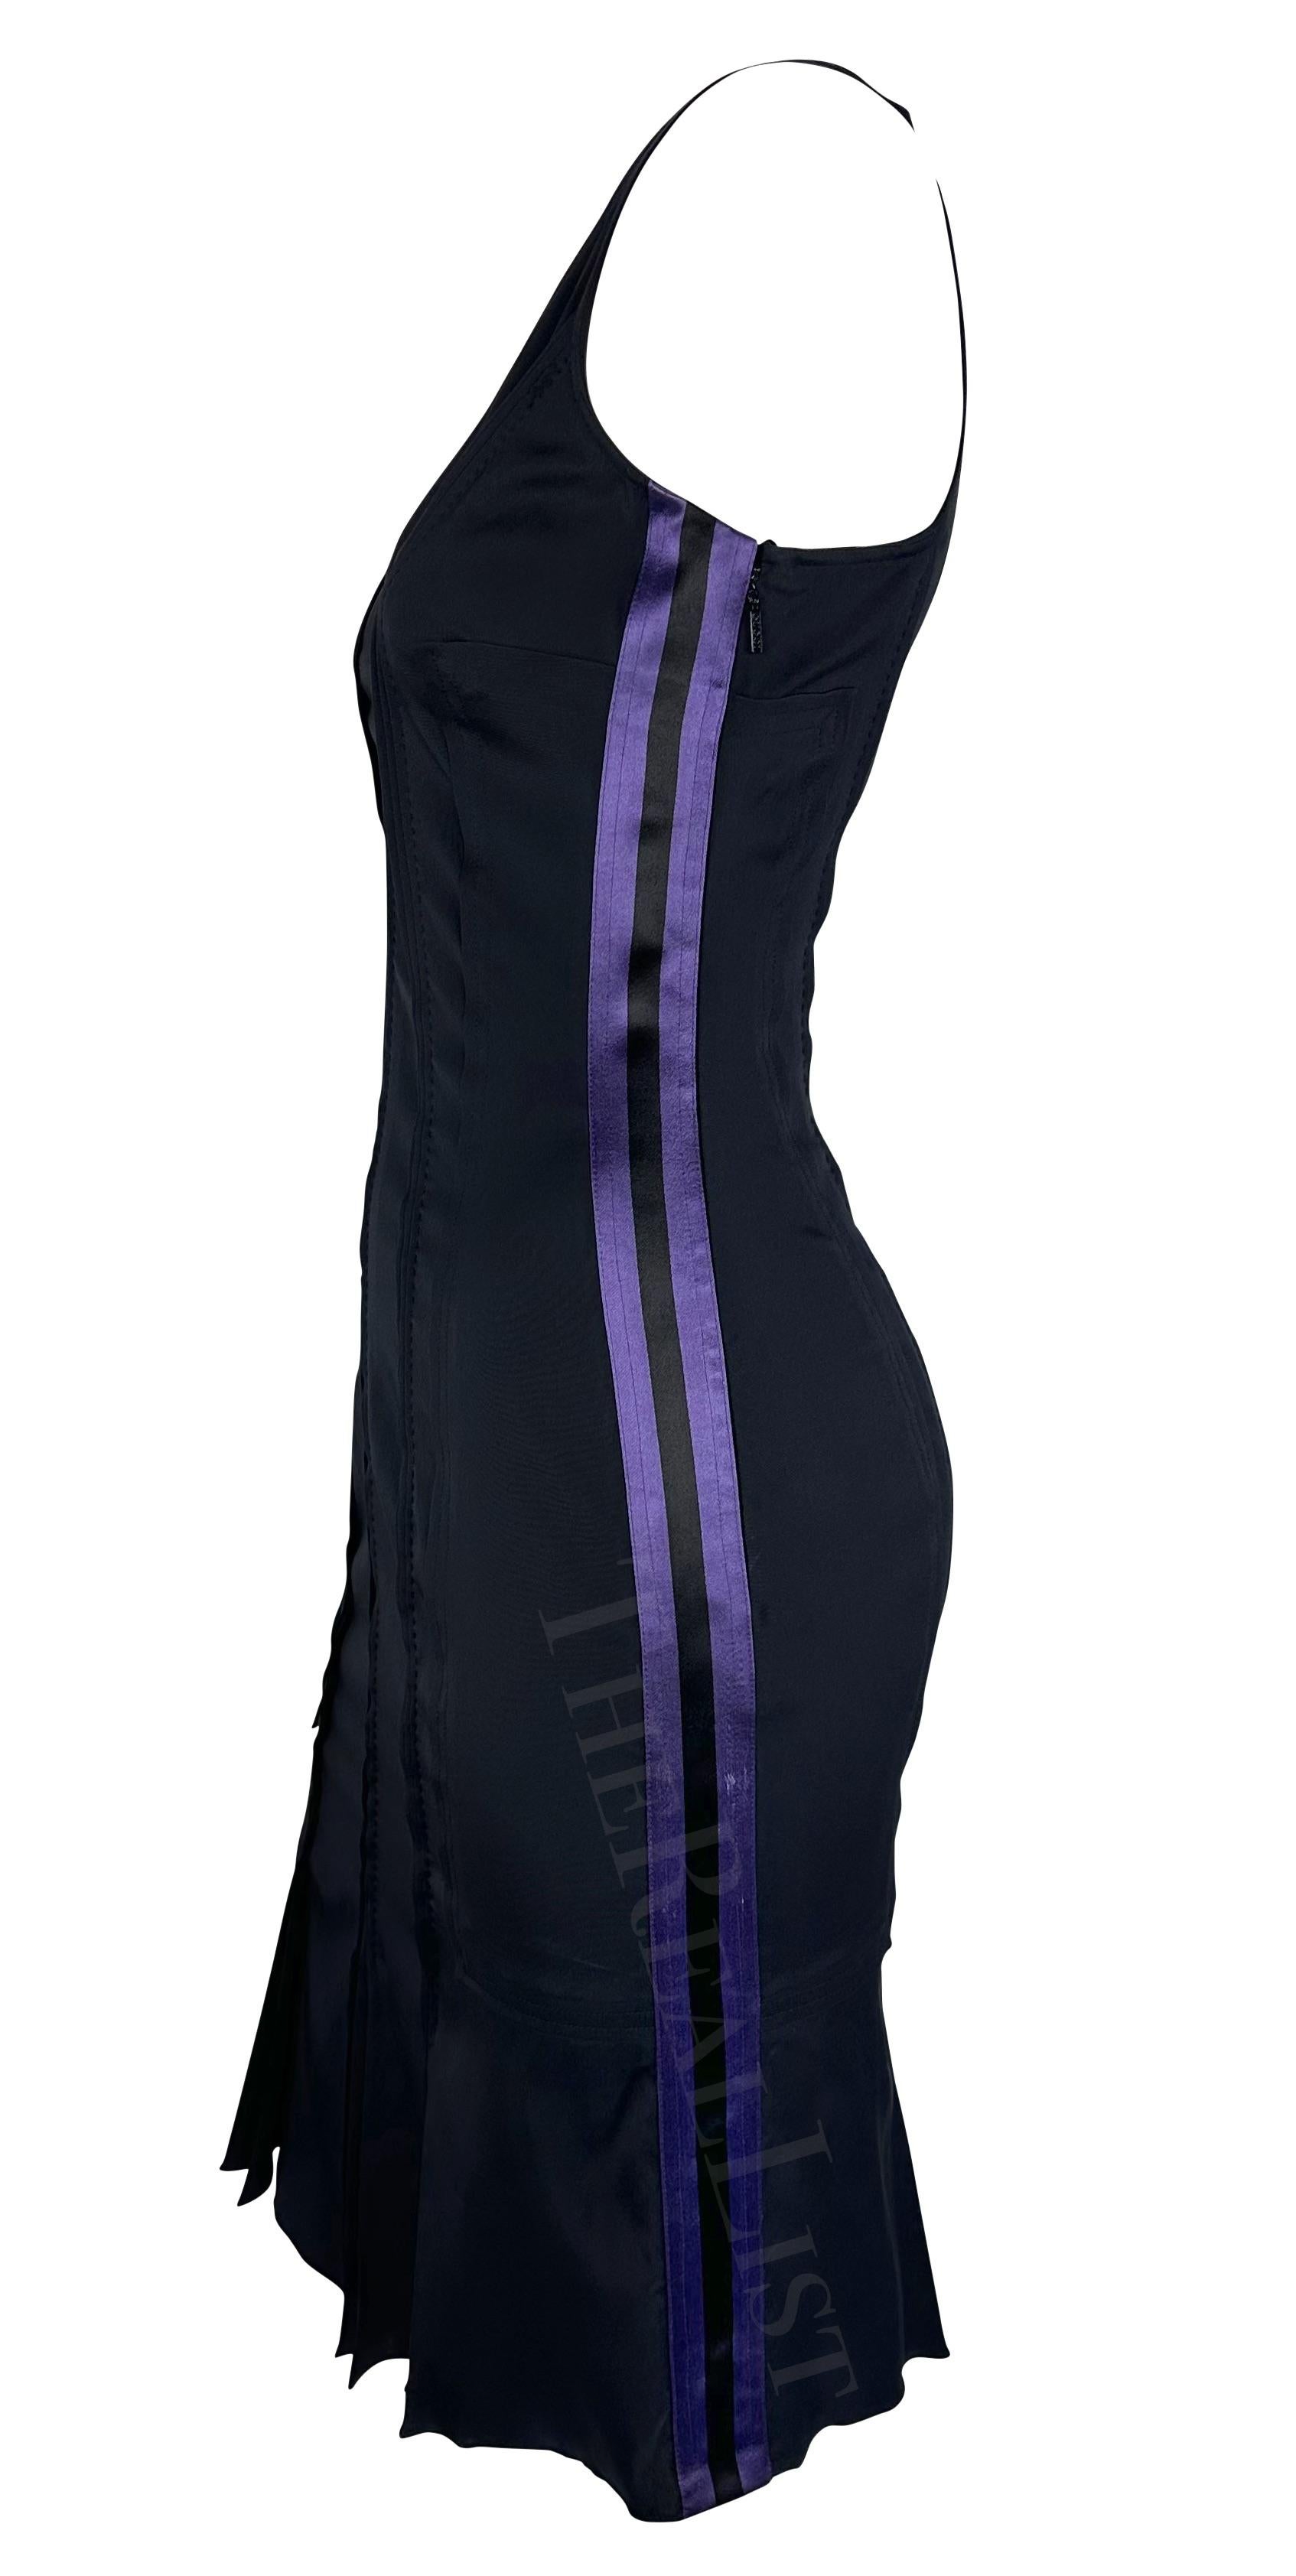 TheRealList presents: an incredible black Gucci mini dress, designed by Tom Ford. From the Spring/Summer 2003 collection, pieces with similar compositions and designs debuted on the season’s runway. With a light purple and black silk satin stripe on